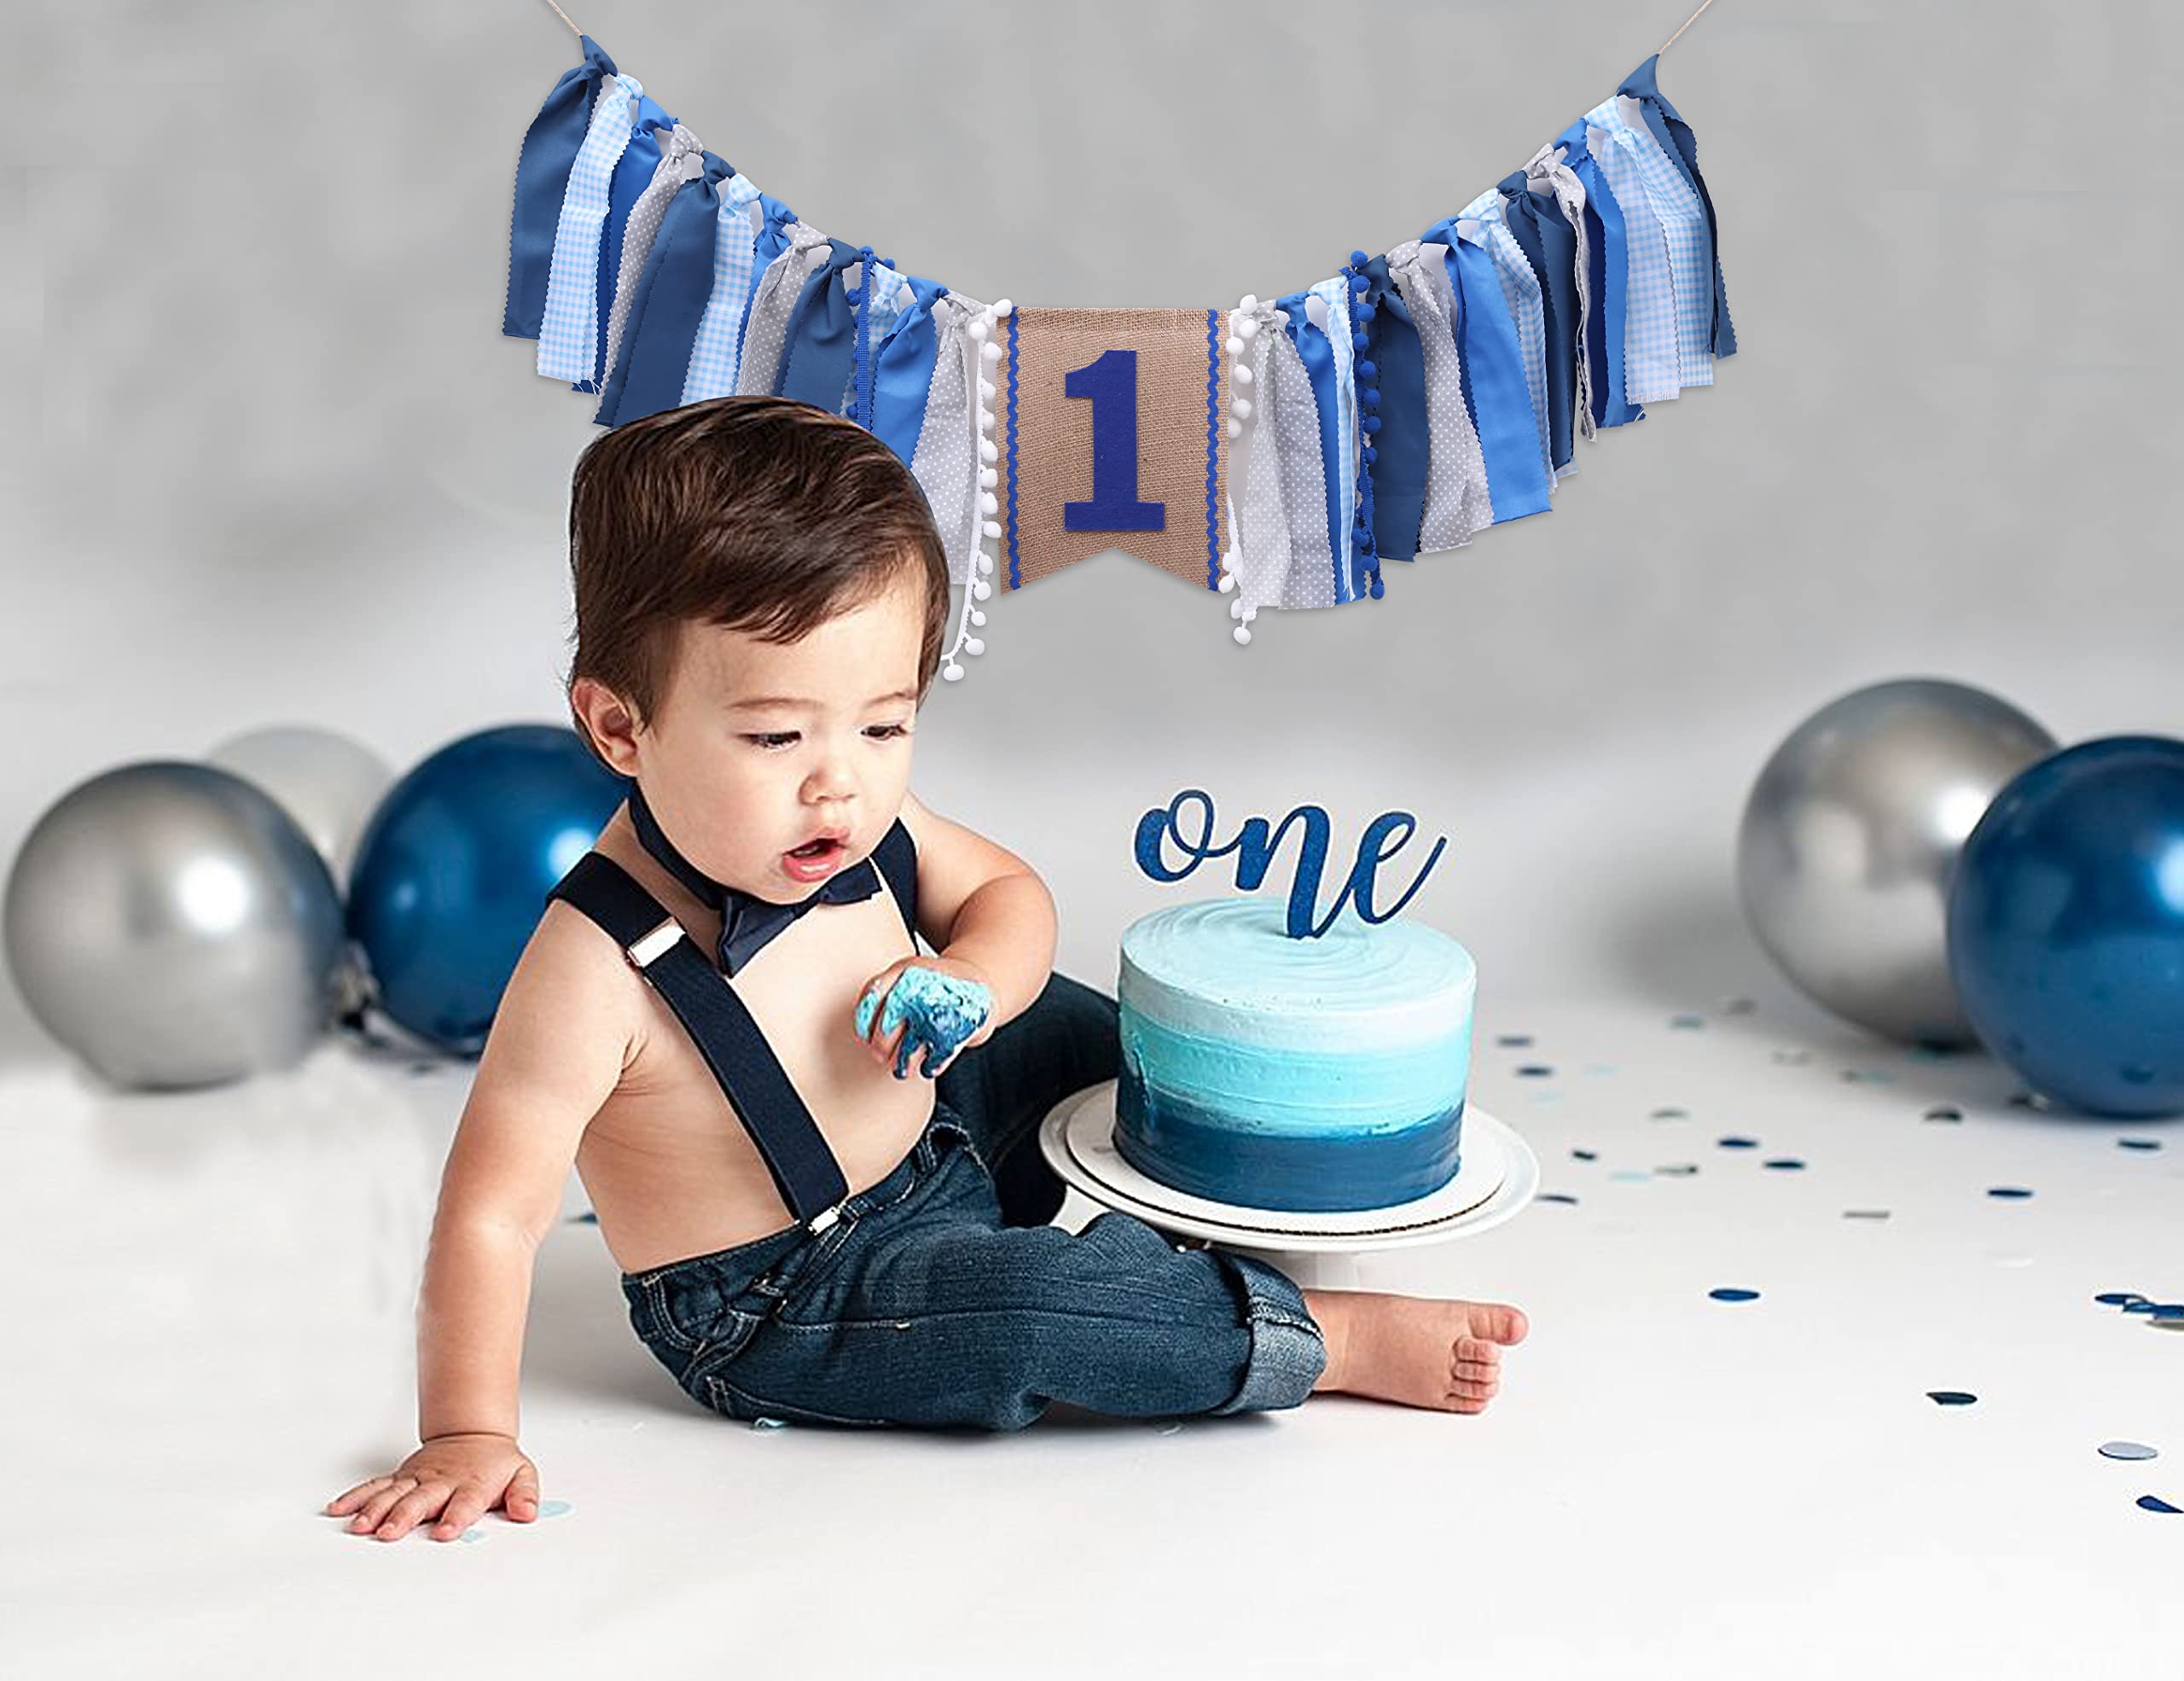 High Chair Banner Boy - First Birthday Decorations For Boy 1st Birthday Banner Highchair Party Supplies Photo Booth Props(Blue White)